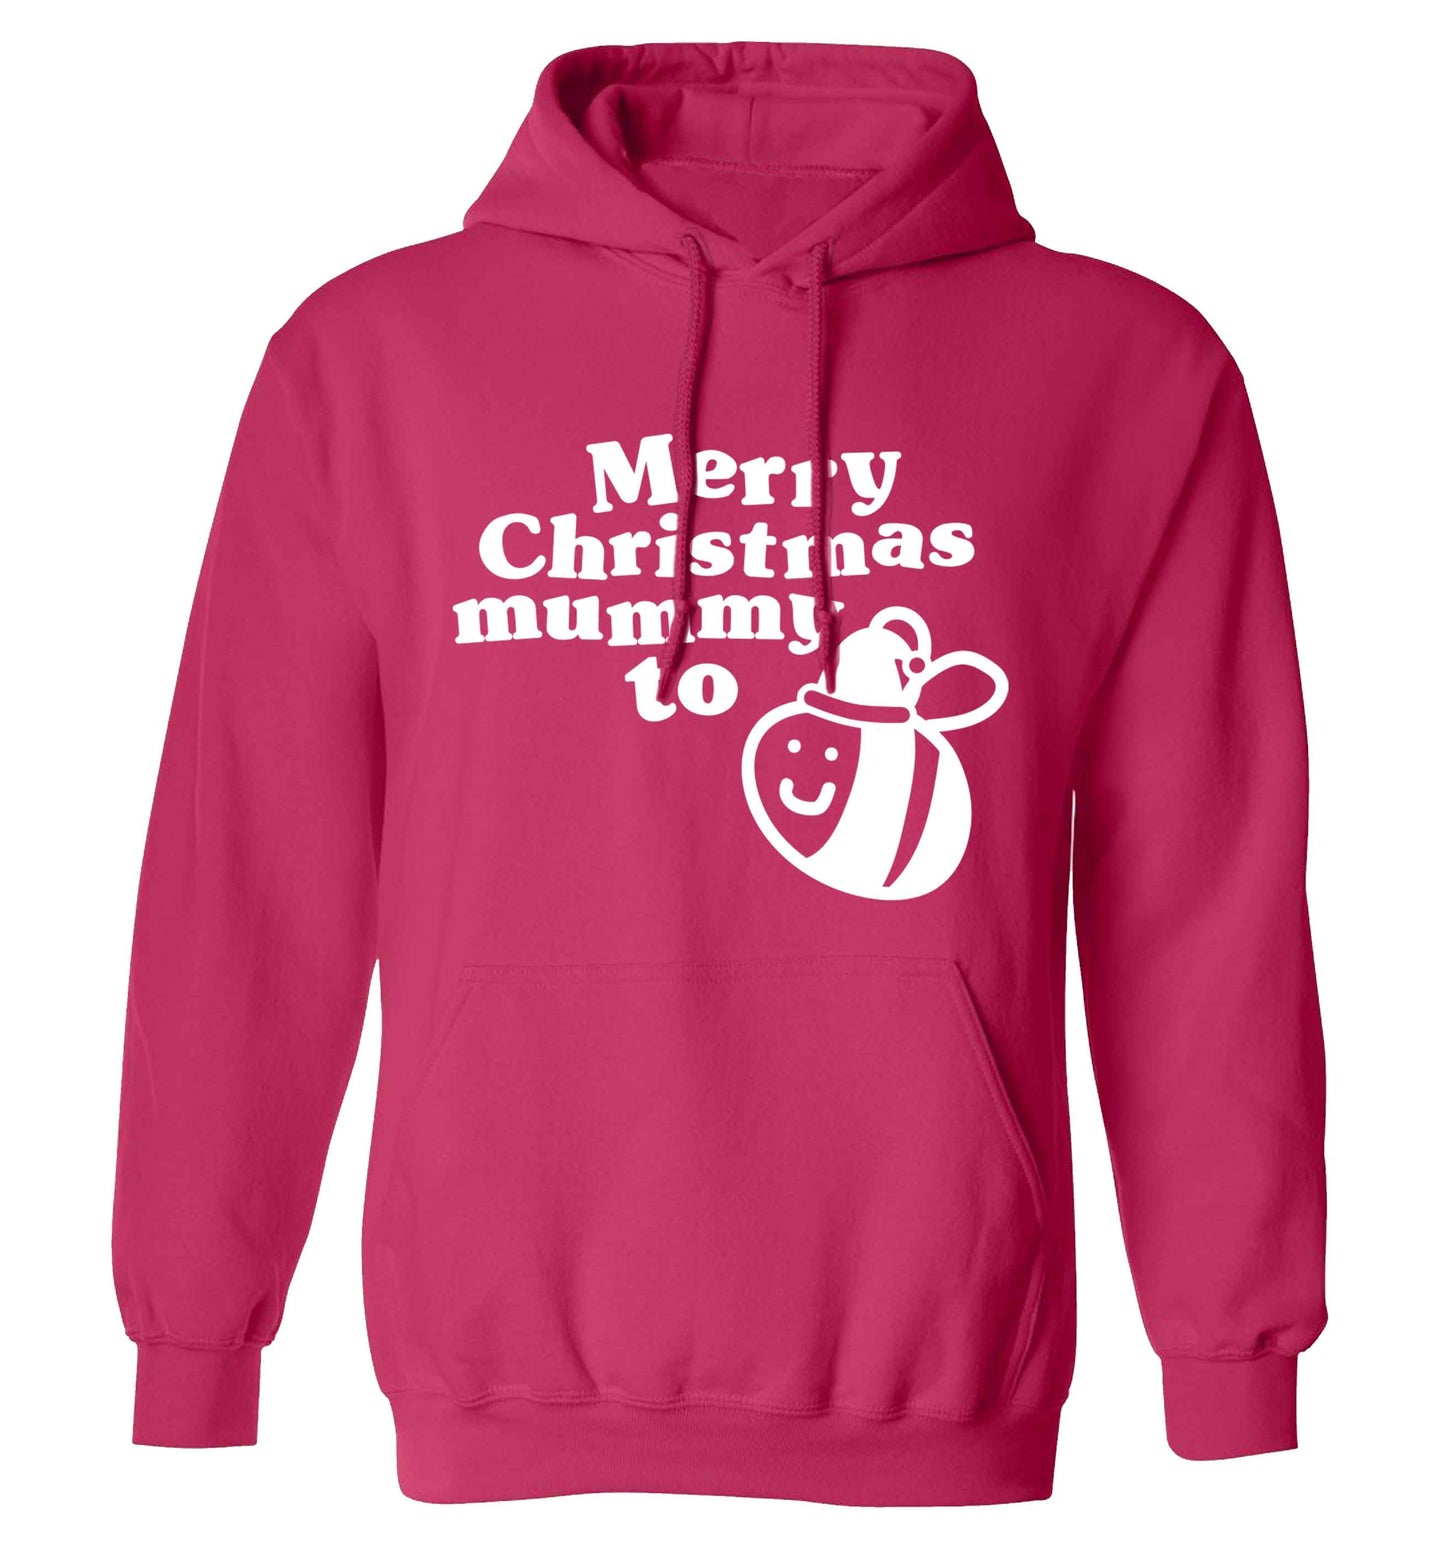 Merry Christmas mummy to be adults unisex pink hoodie 2XL